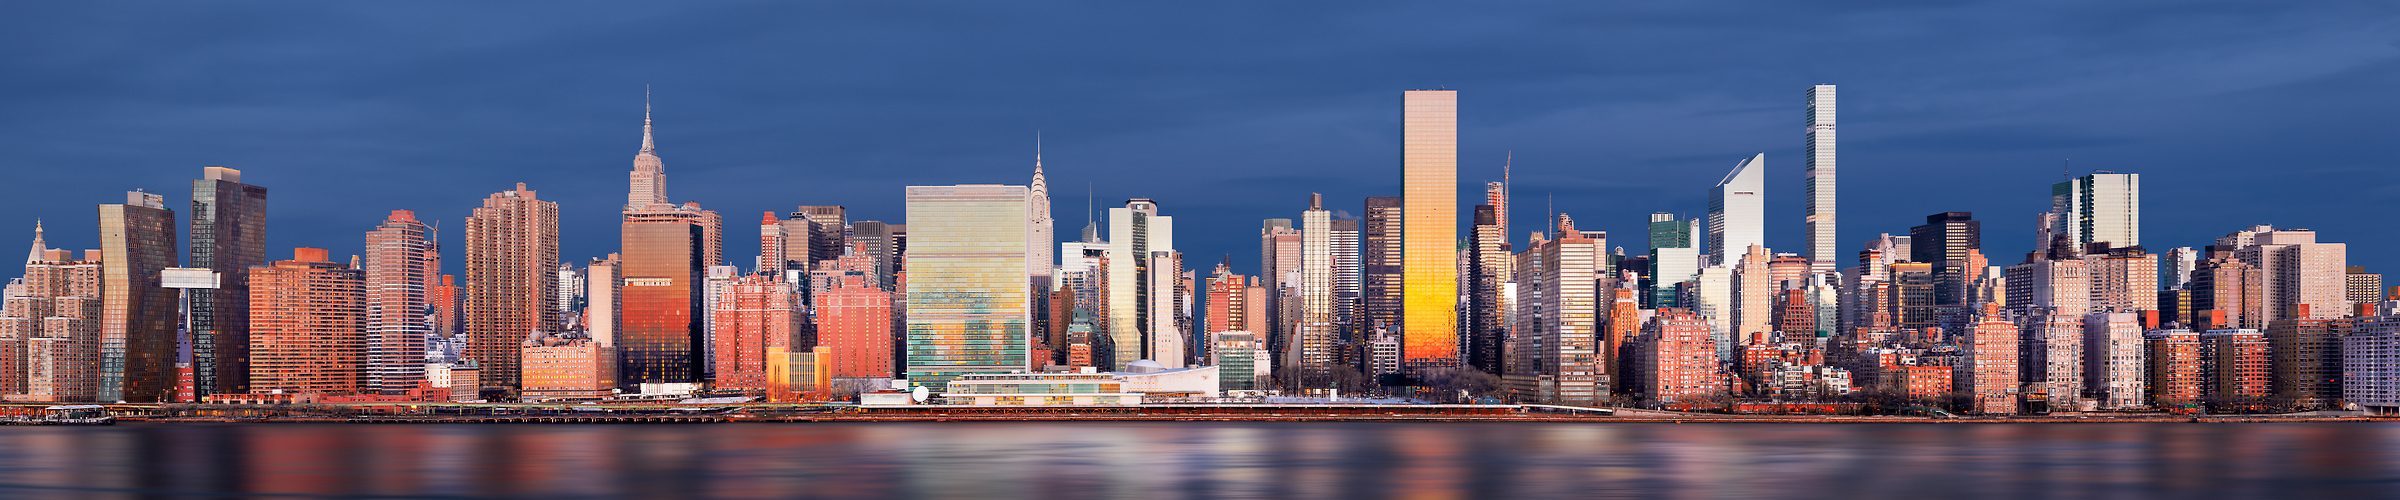 1,632 megapixels! A very high resolution, large-format panorama of the New York City skyline; gigapixel photograph created by Dan Piech in Manhattan